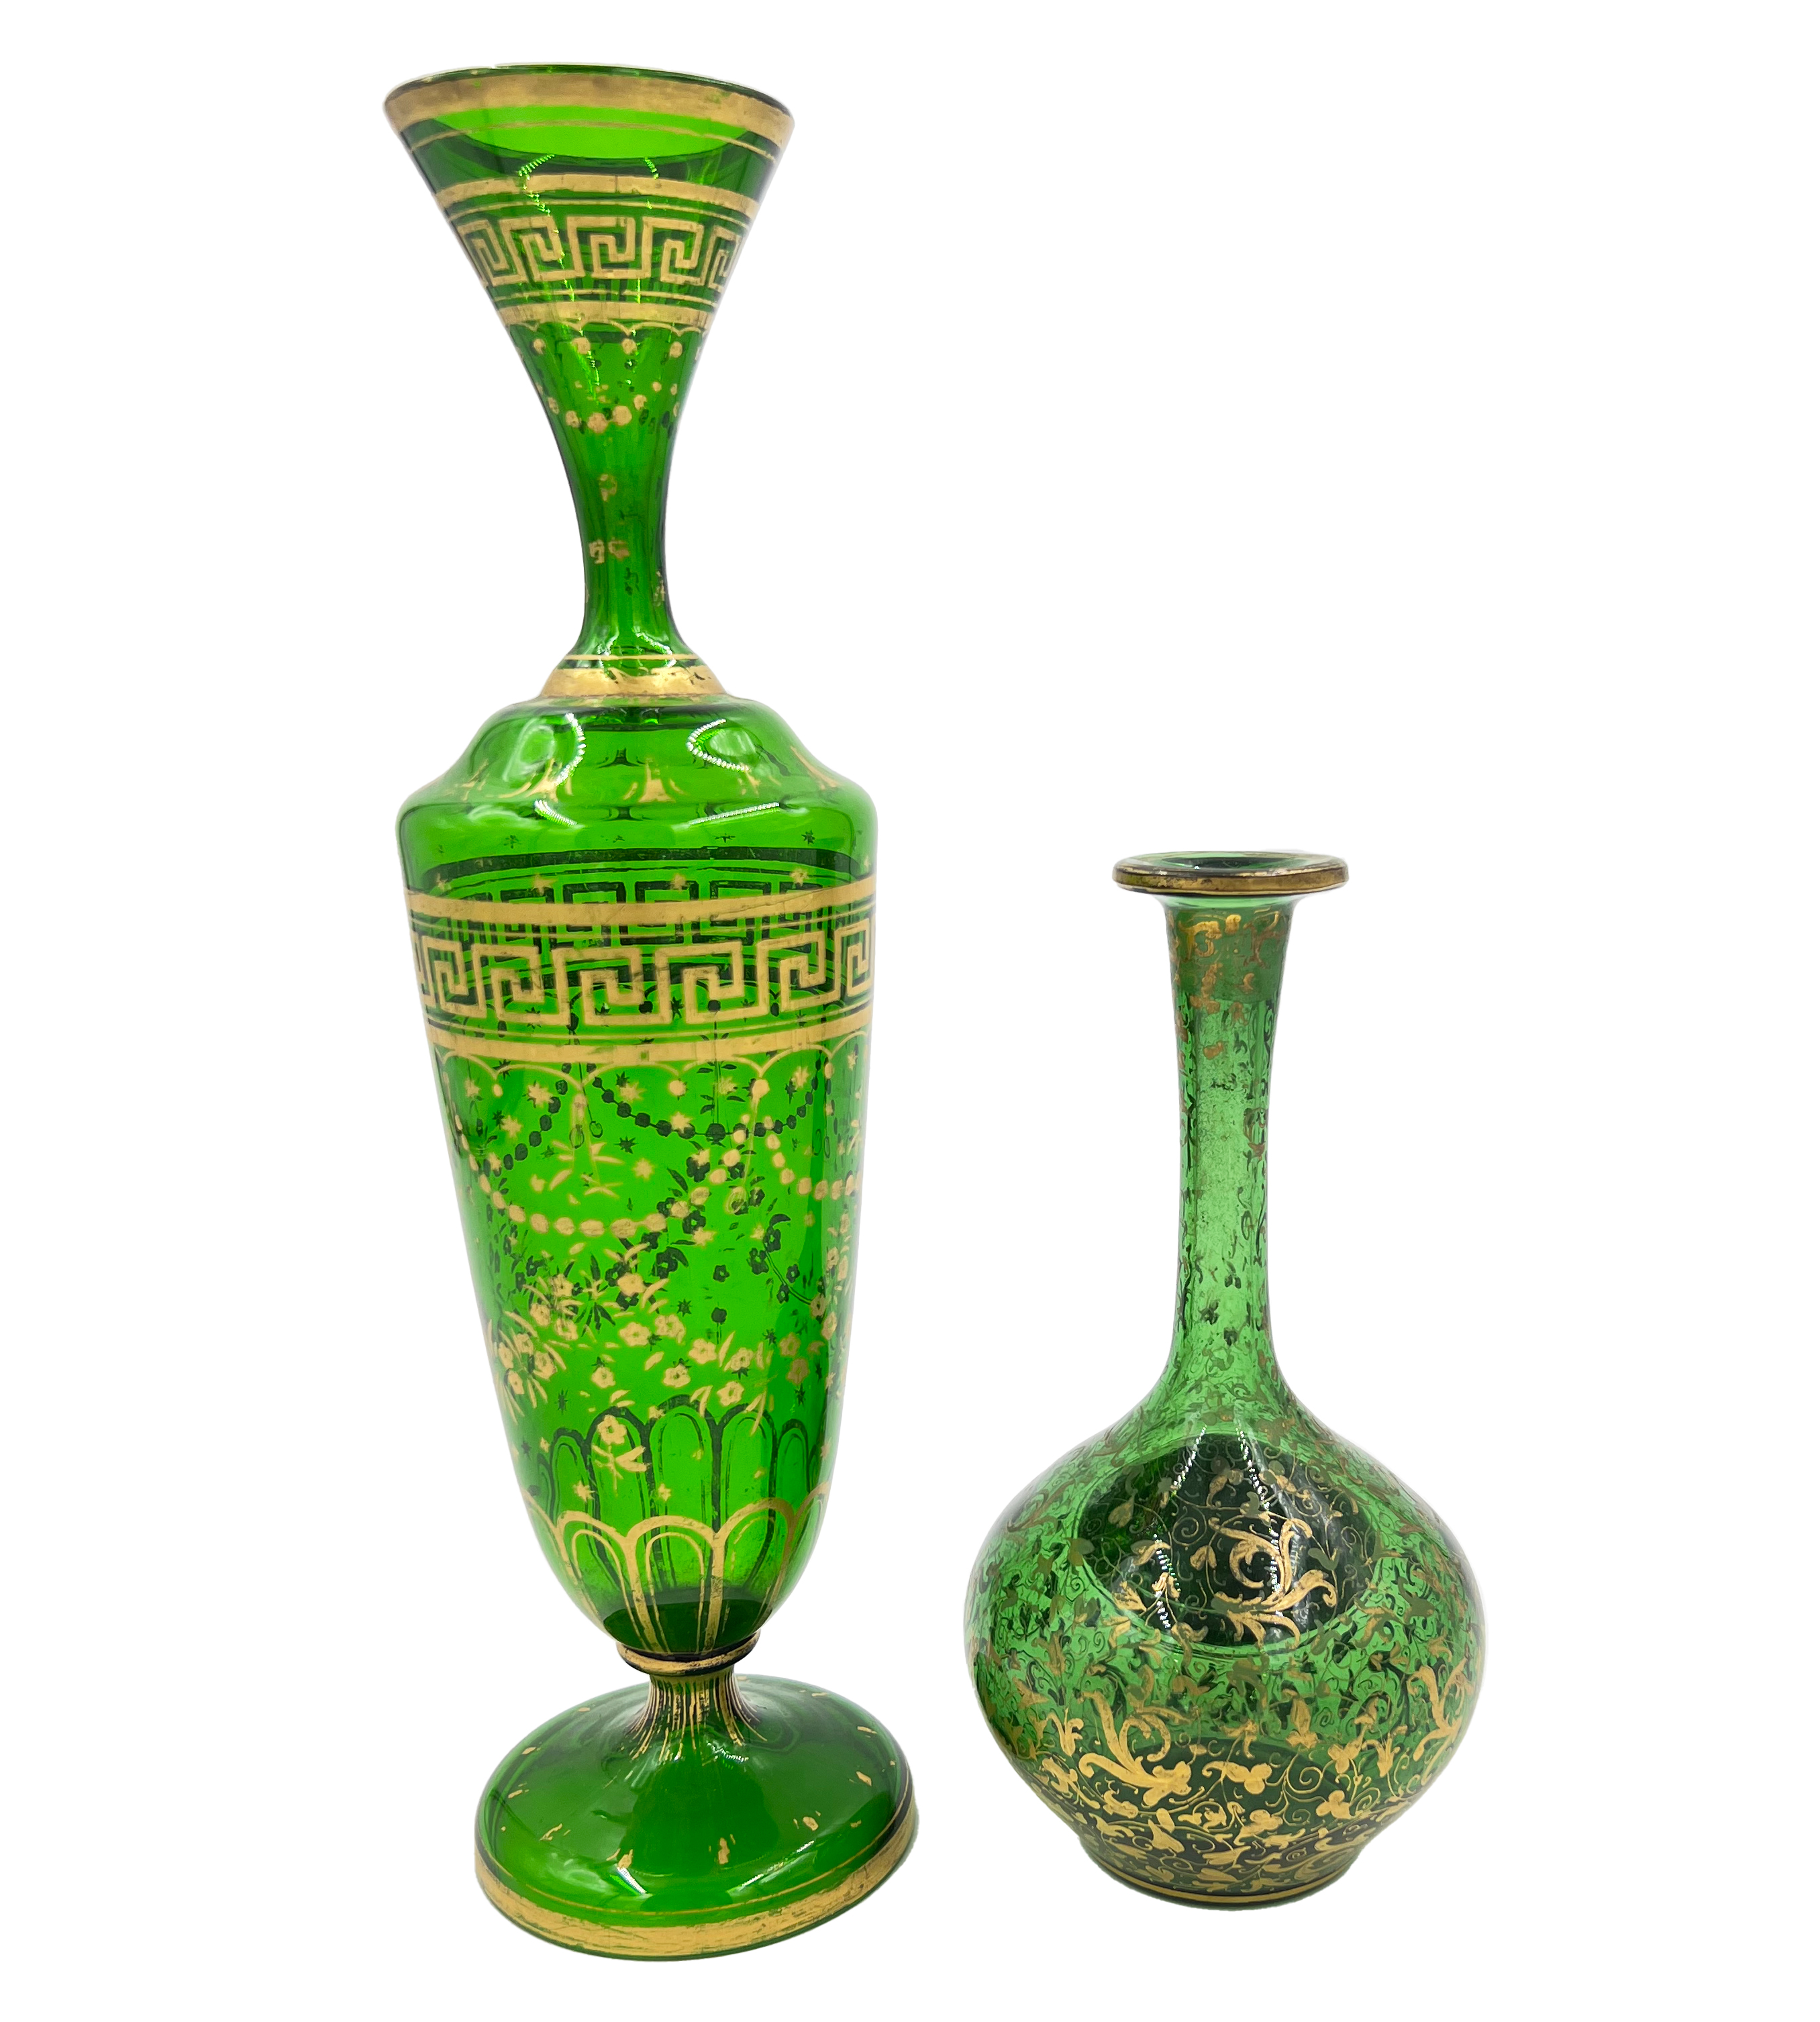 TWO GREEN BOHEMIAN GLASS VASES, LATE 19TH CENTURY - Image 2 of 2